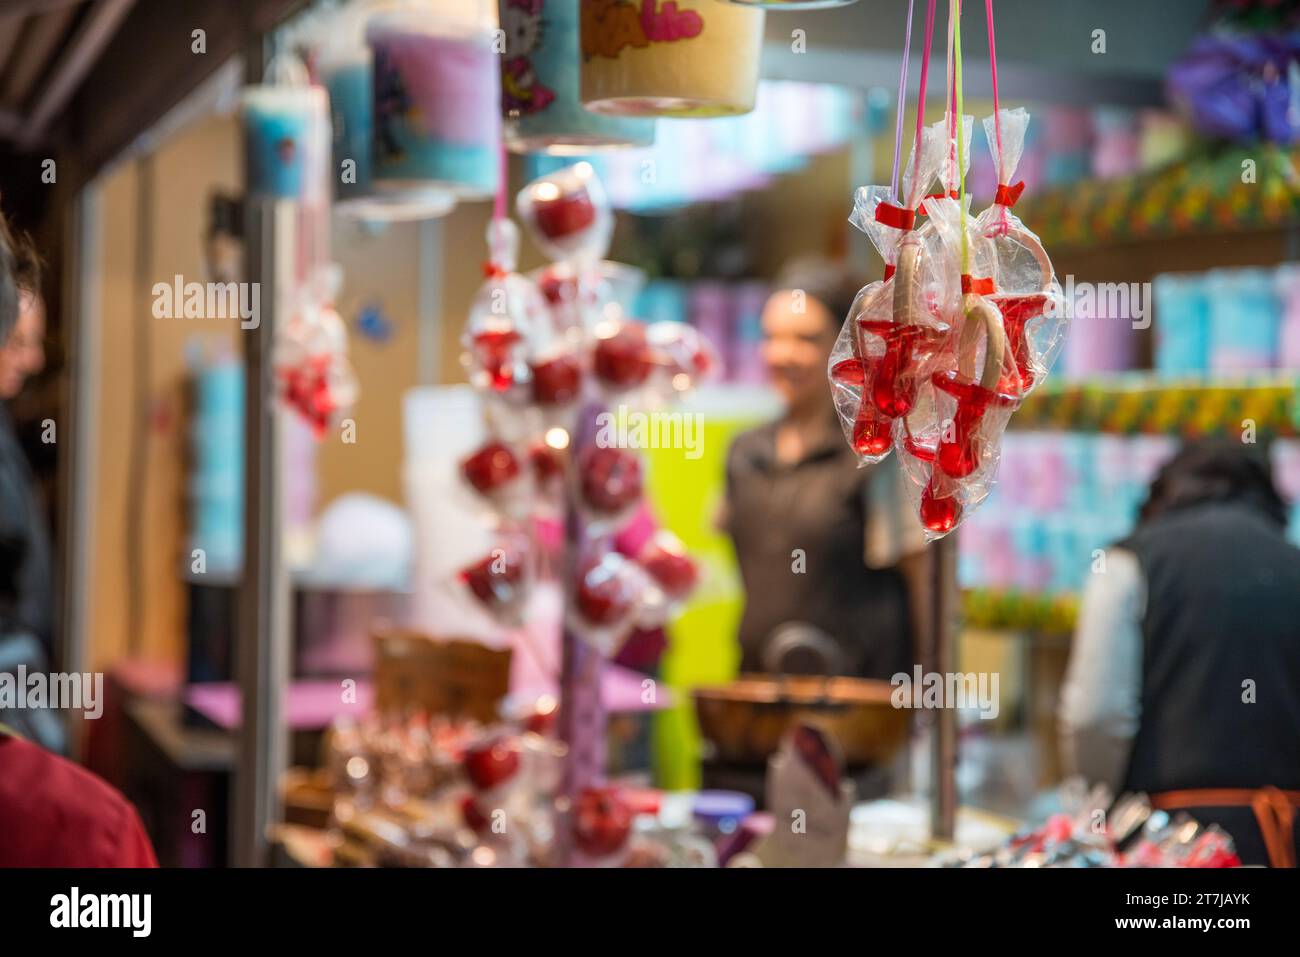 Capture the sweetness of the season: Vibrant candy lollipops take center stage at the festive Christmas fair, tempting with sugary delights for holida Stock Photo